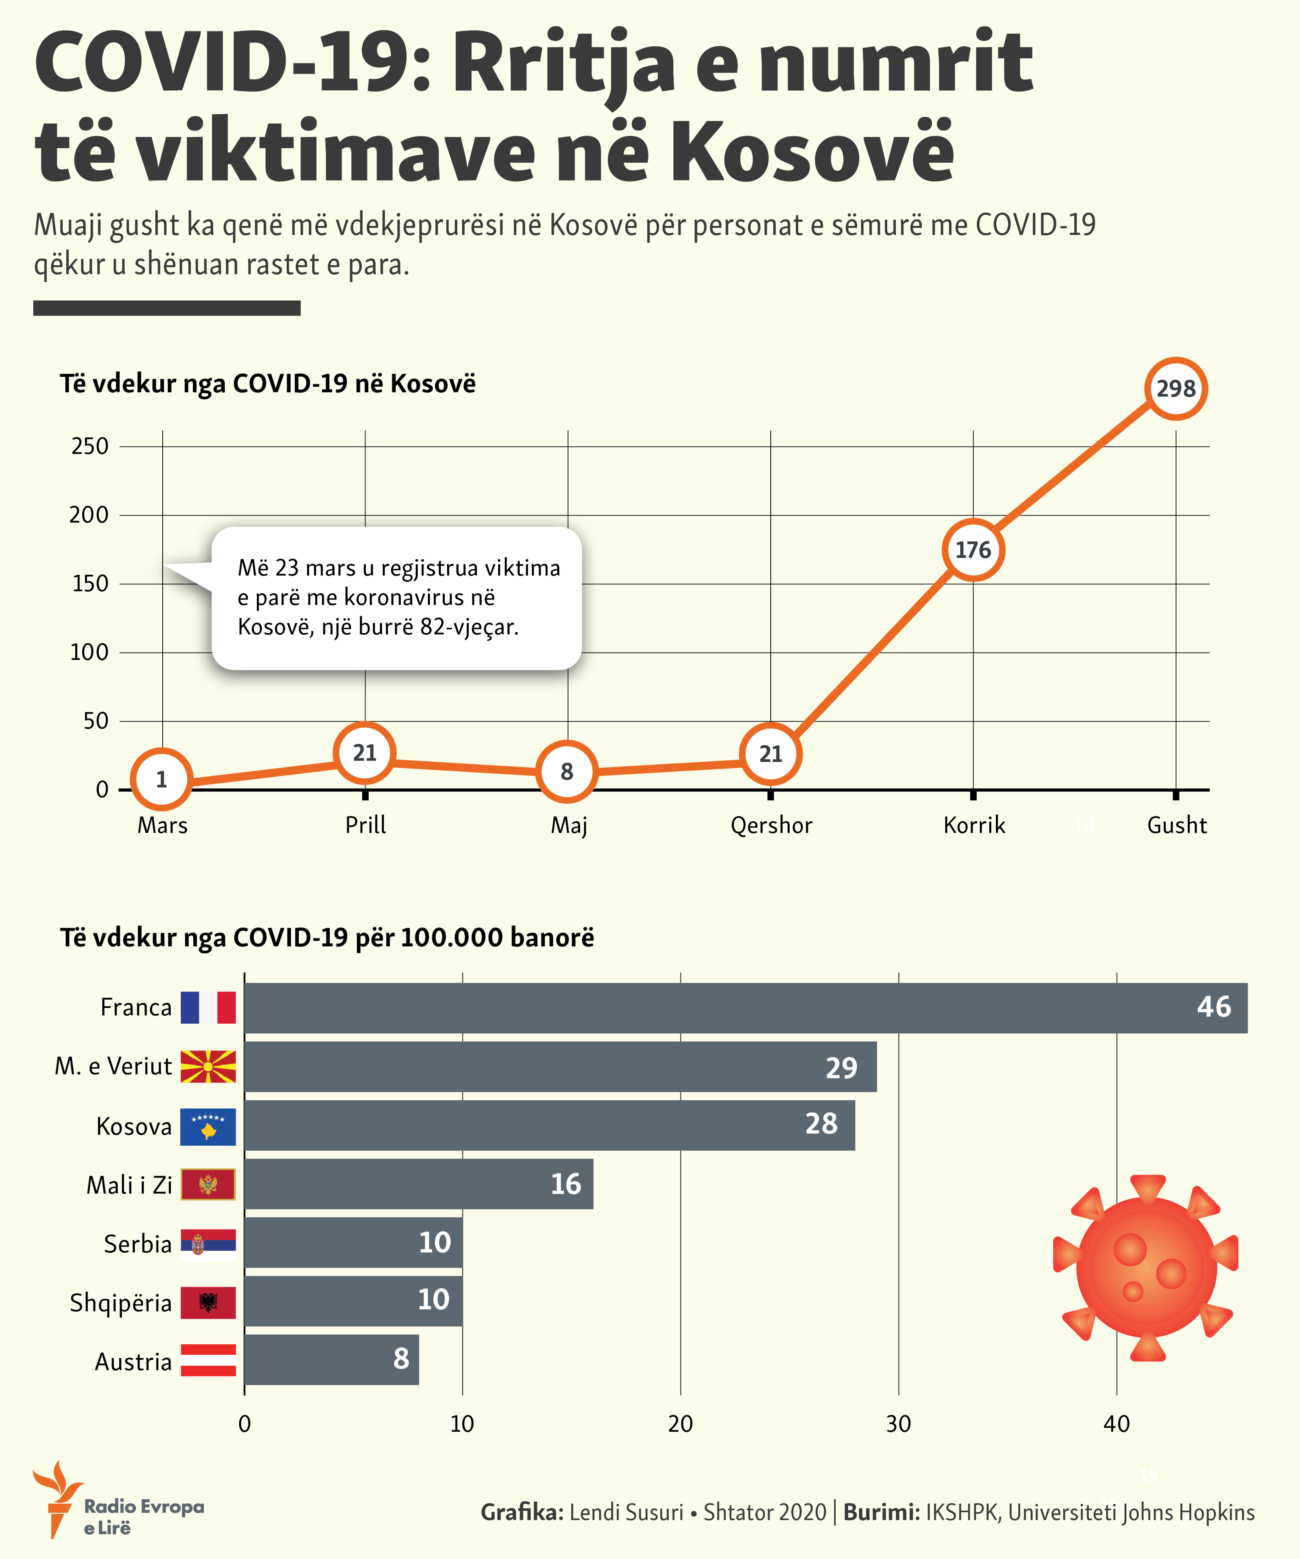 Kosovo - The scale of the number of victims from COVID-19